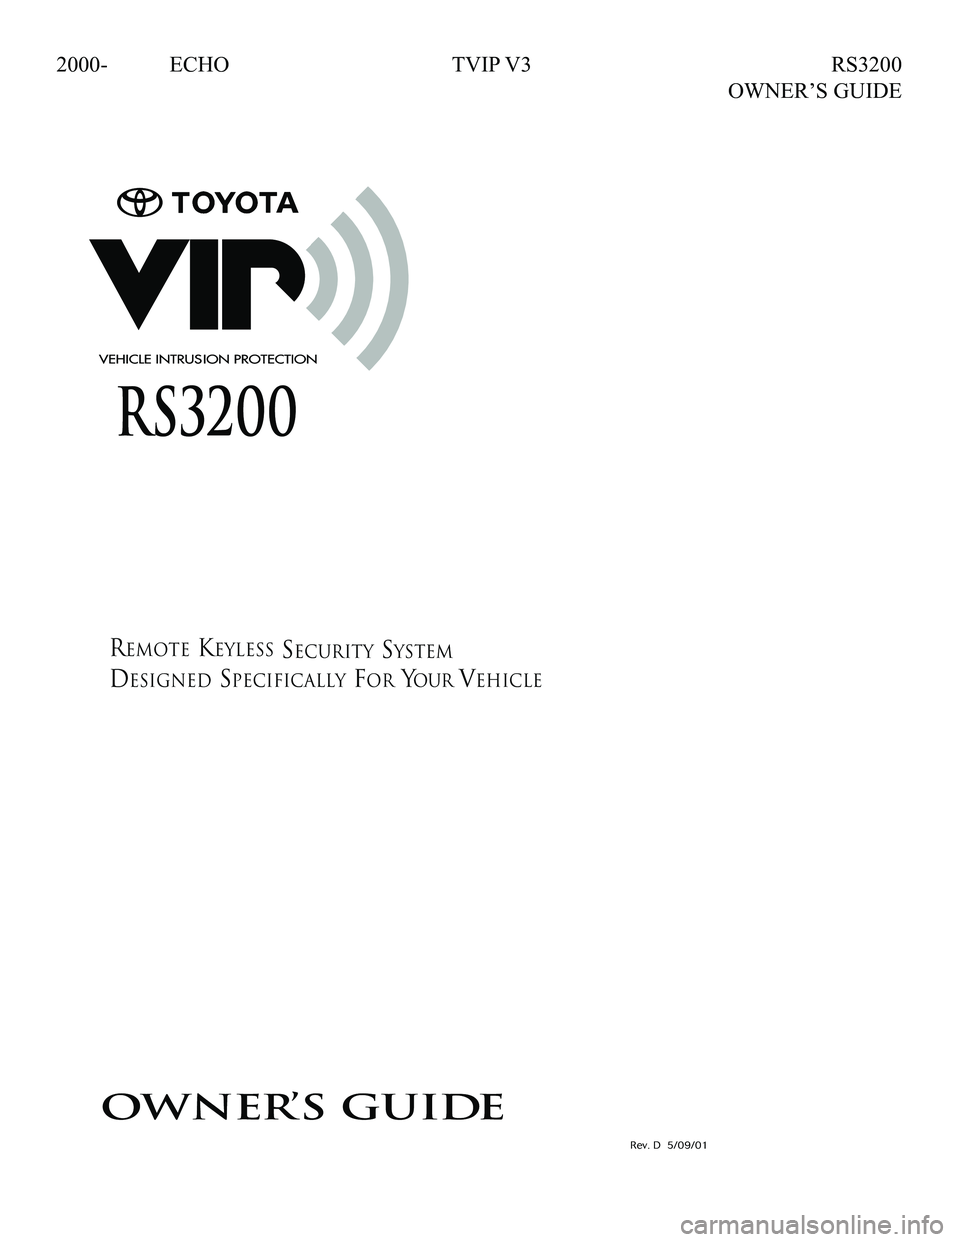 TOYOTA ECHO 2000  Accessories, Audio & Navigation (in English) 2000- ECHO  TVIP V3  RS3200 
     OWNER’S GUIDE
Remote Keyless Security system
Designed Specifically for your Vehicle
owner’s guide
RS3200
090002-24750700
Rev. D  5/09/01
2005-2006 COROLLA/MATRIX 